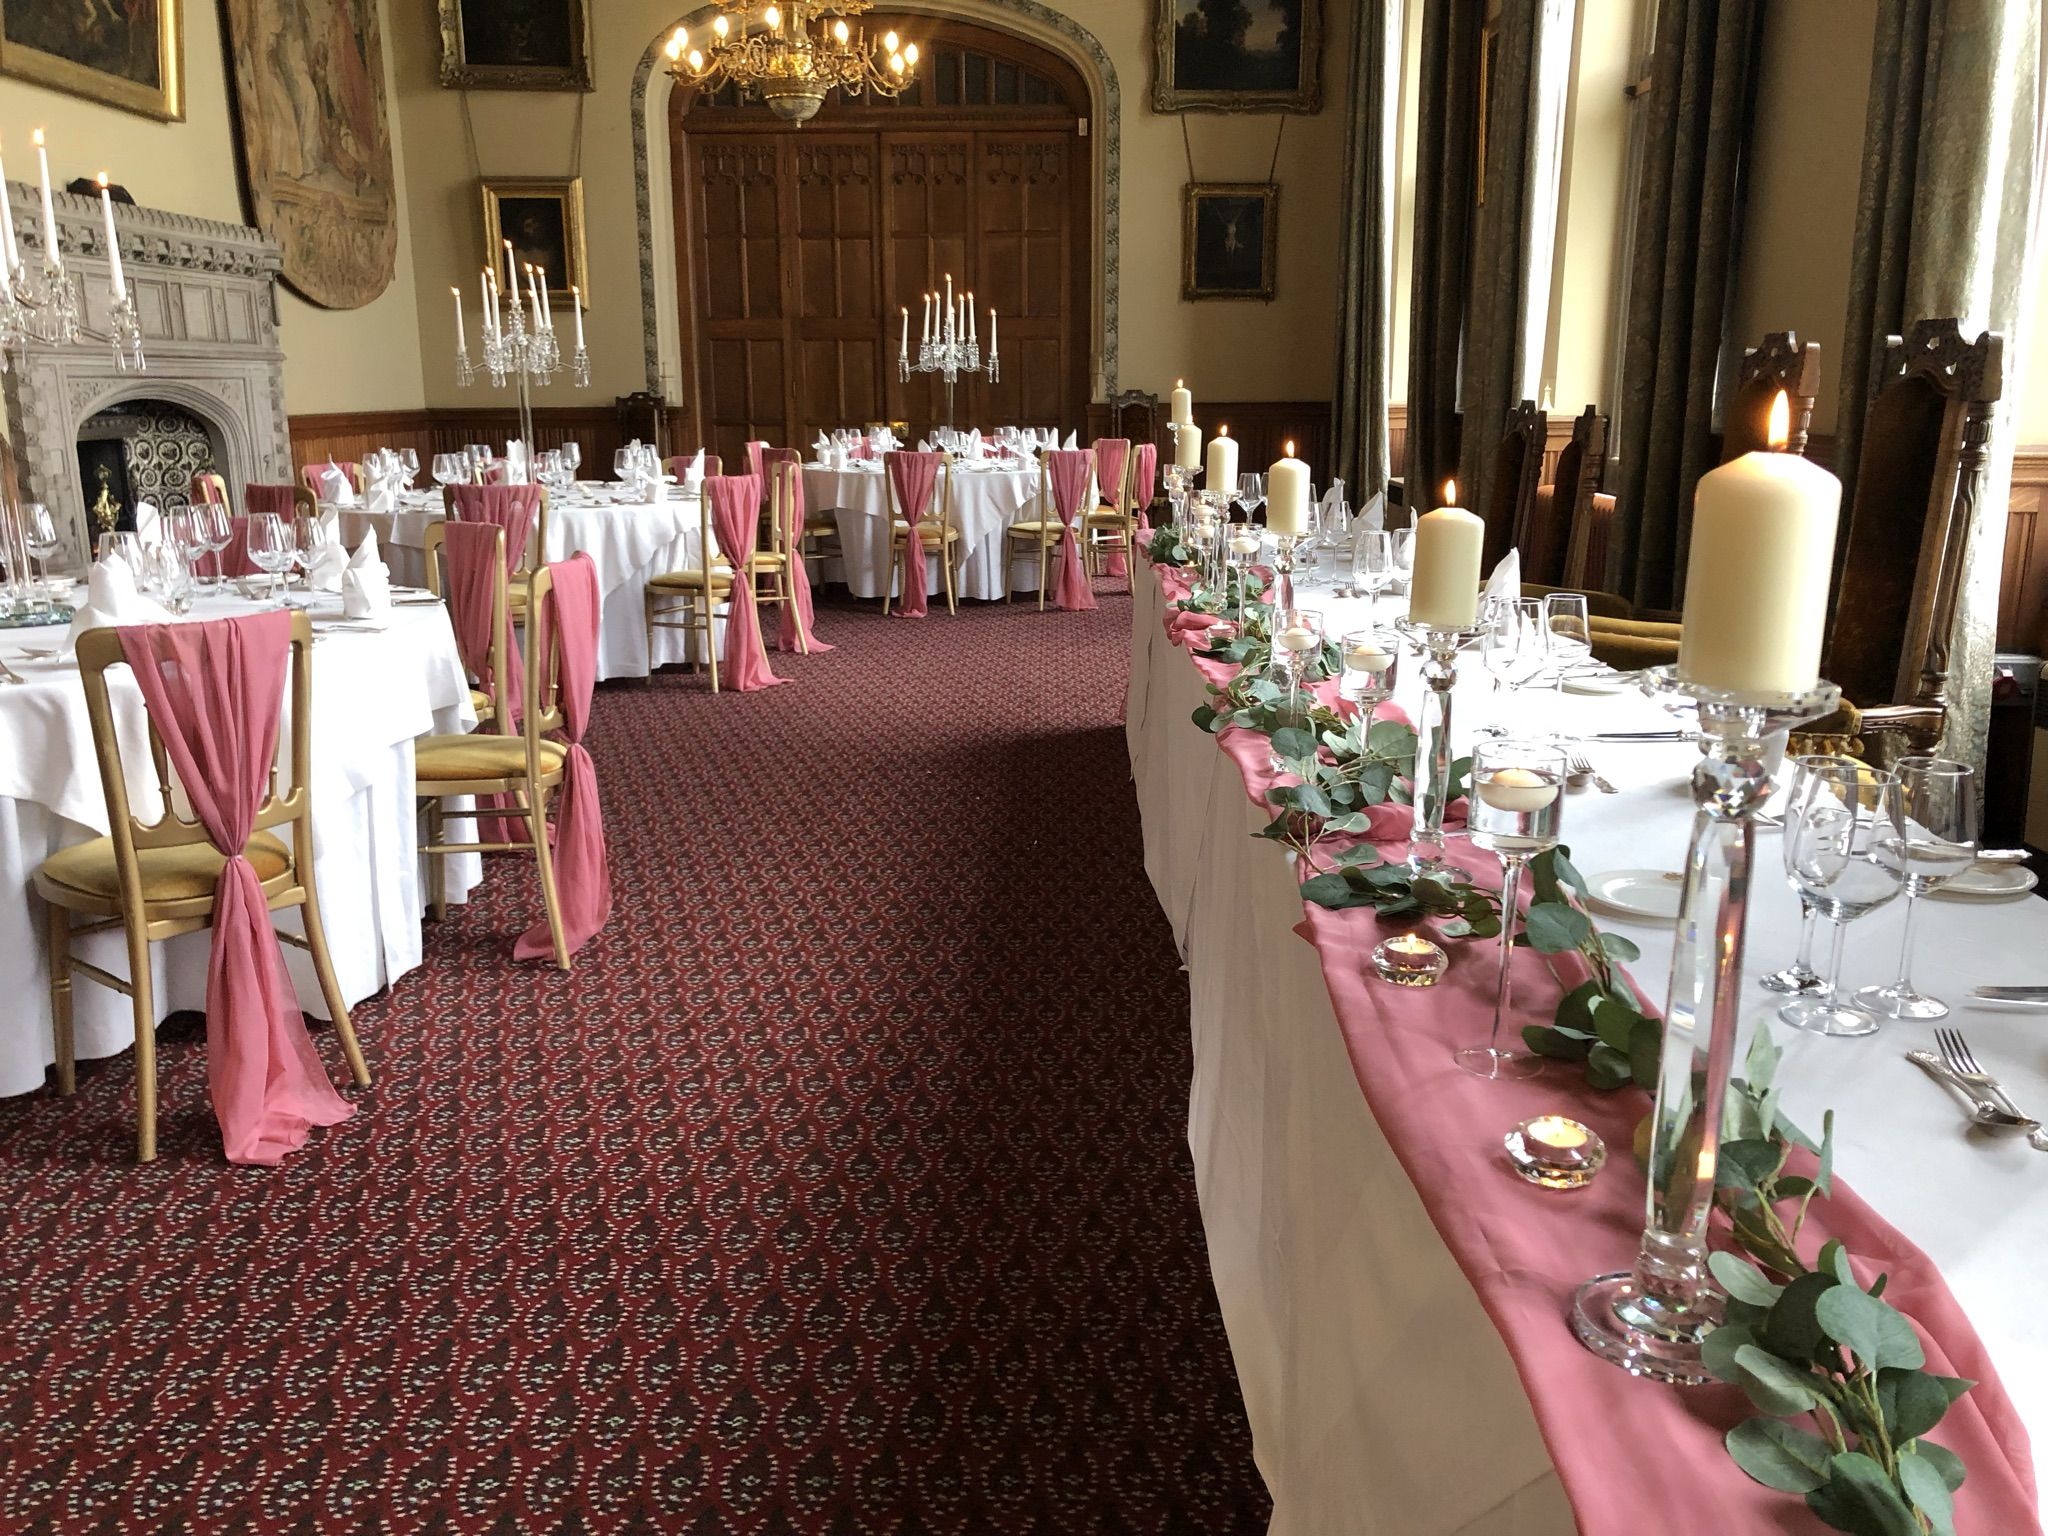 a banquet hall with tables and chairs covered in pink linens.